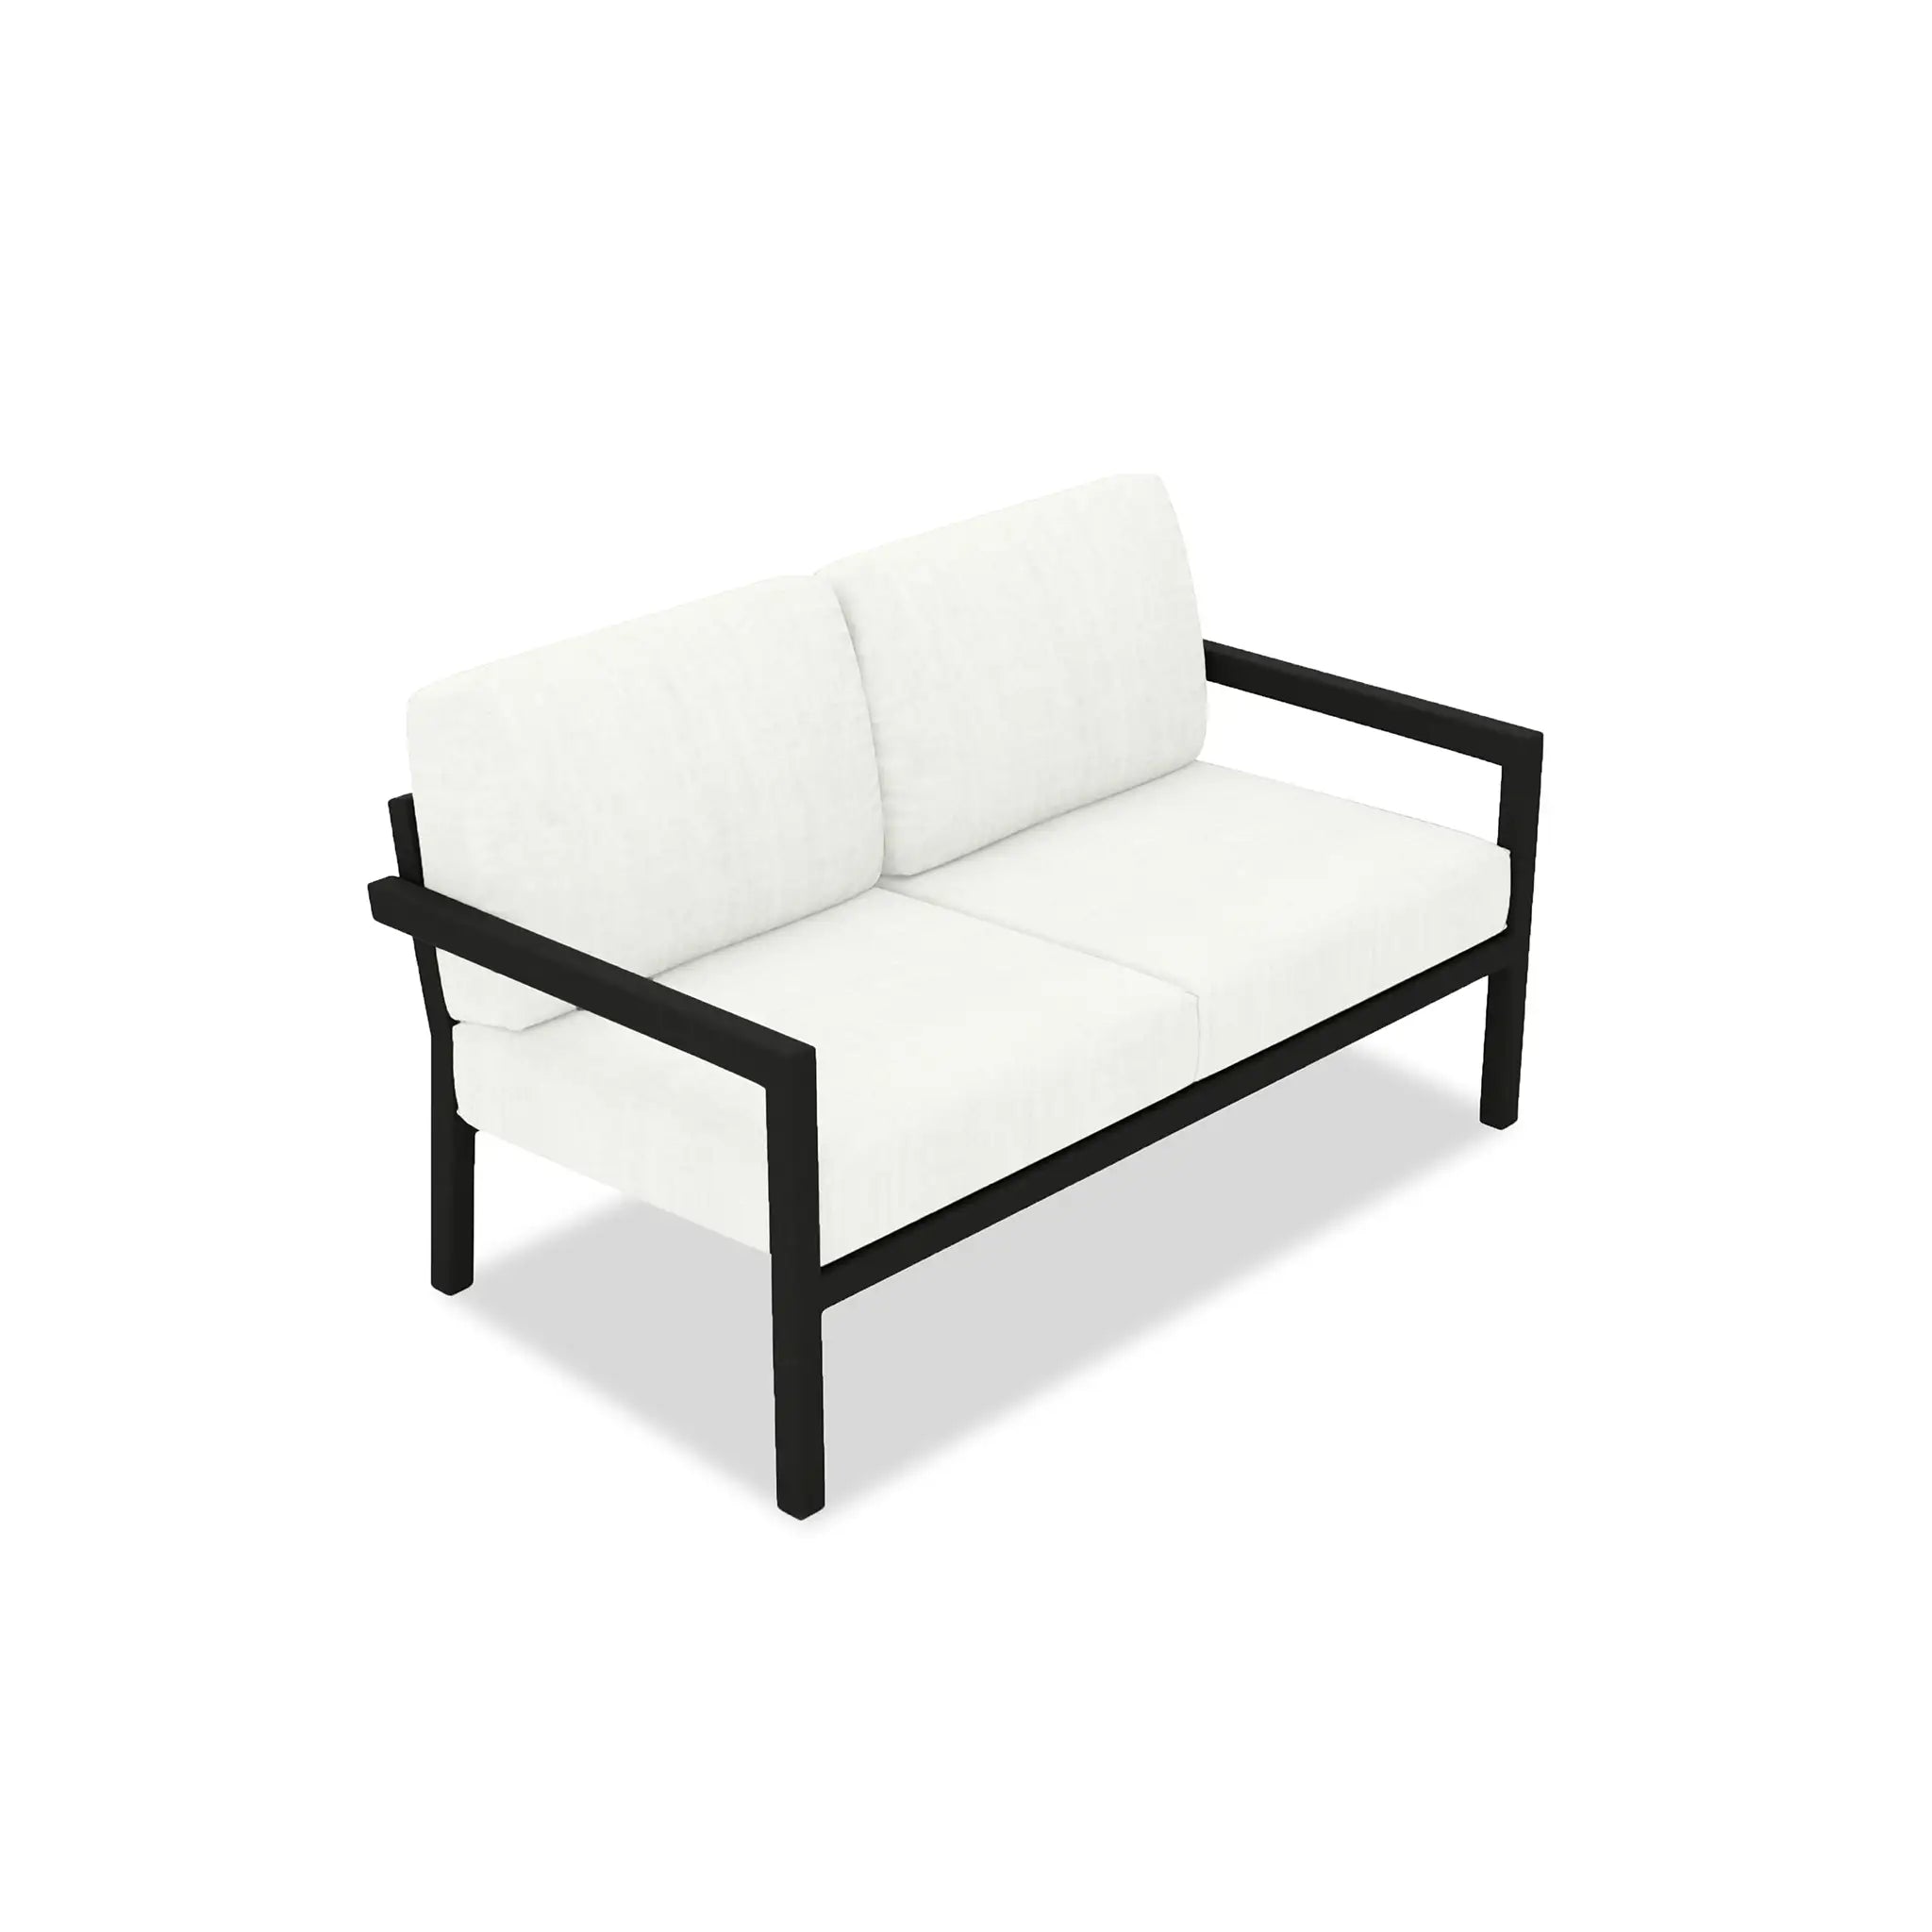 Pacifica Loveseat - Black by Harmonia Living